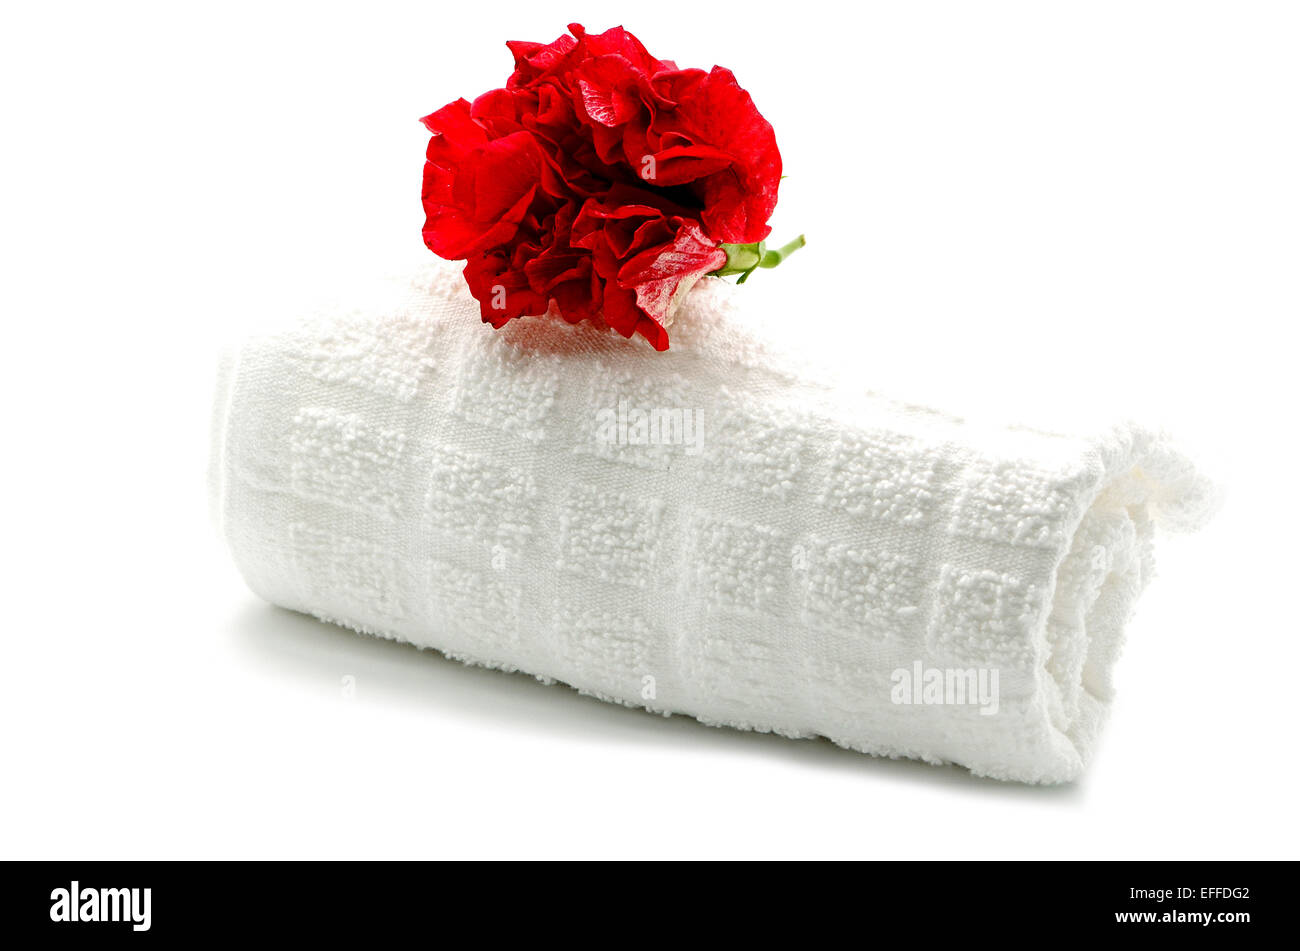 Beautiful red Hibiscus flower with towel on spa theme Stock Photo